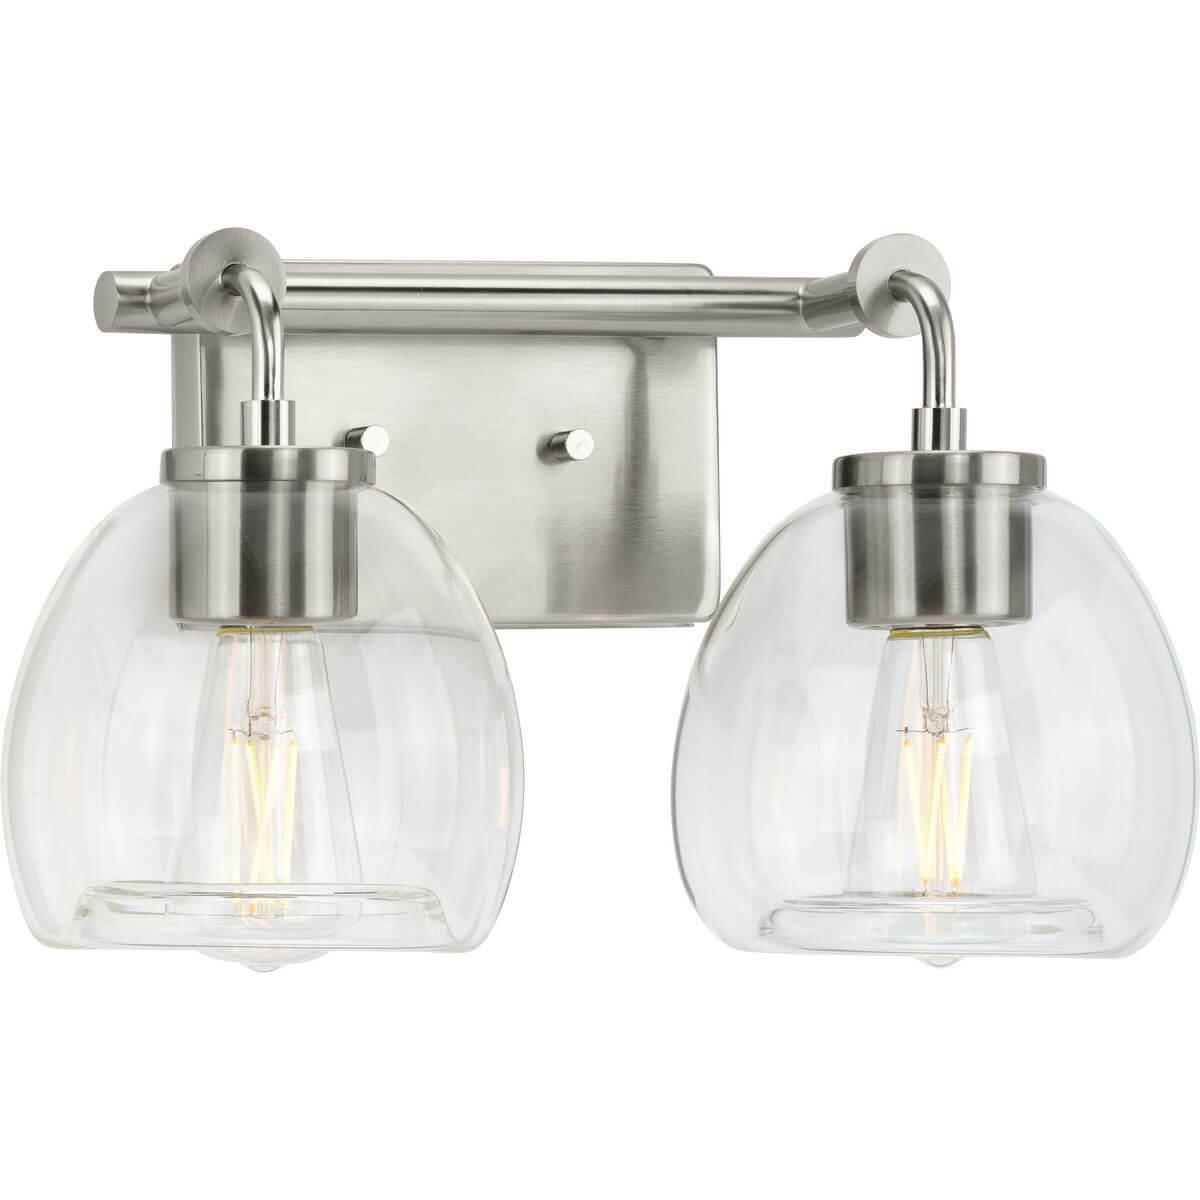 Progress Lighting Caisson 2 Light 15 inch Bath Vanity Light in Brushed Nickel with Clear Glass P300346-009